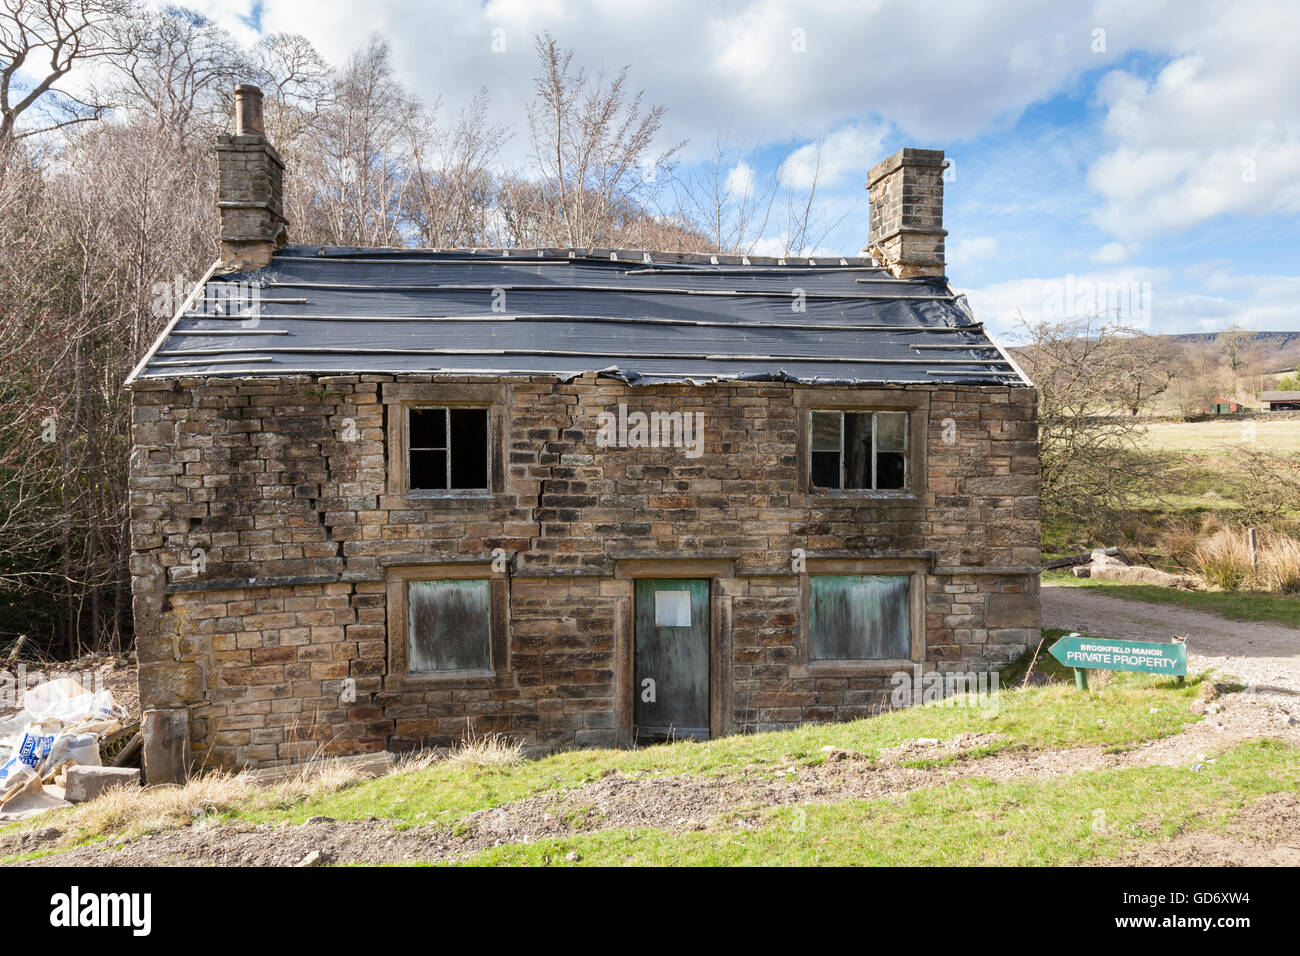 Derelict farm cottage under repair in the countryside. Derbyshire, Peak District, England, UK Stock Photo